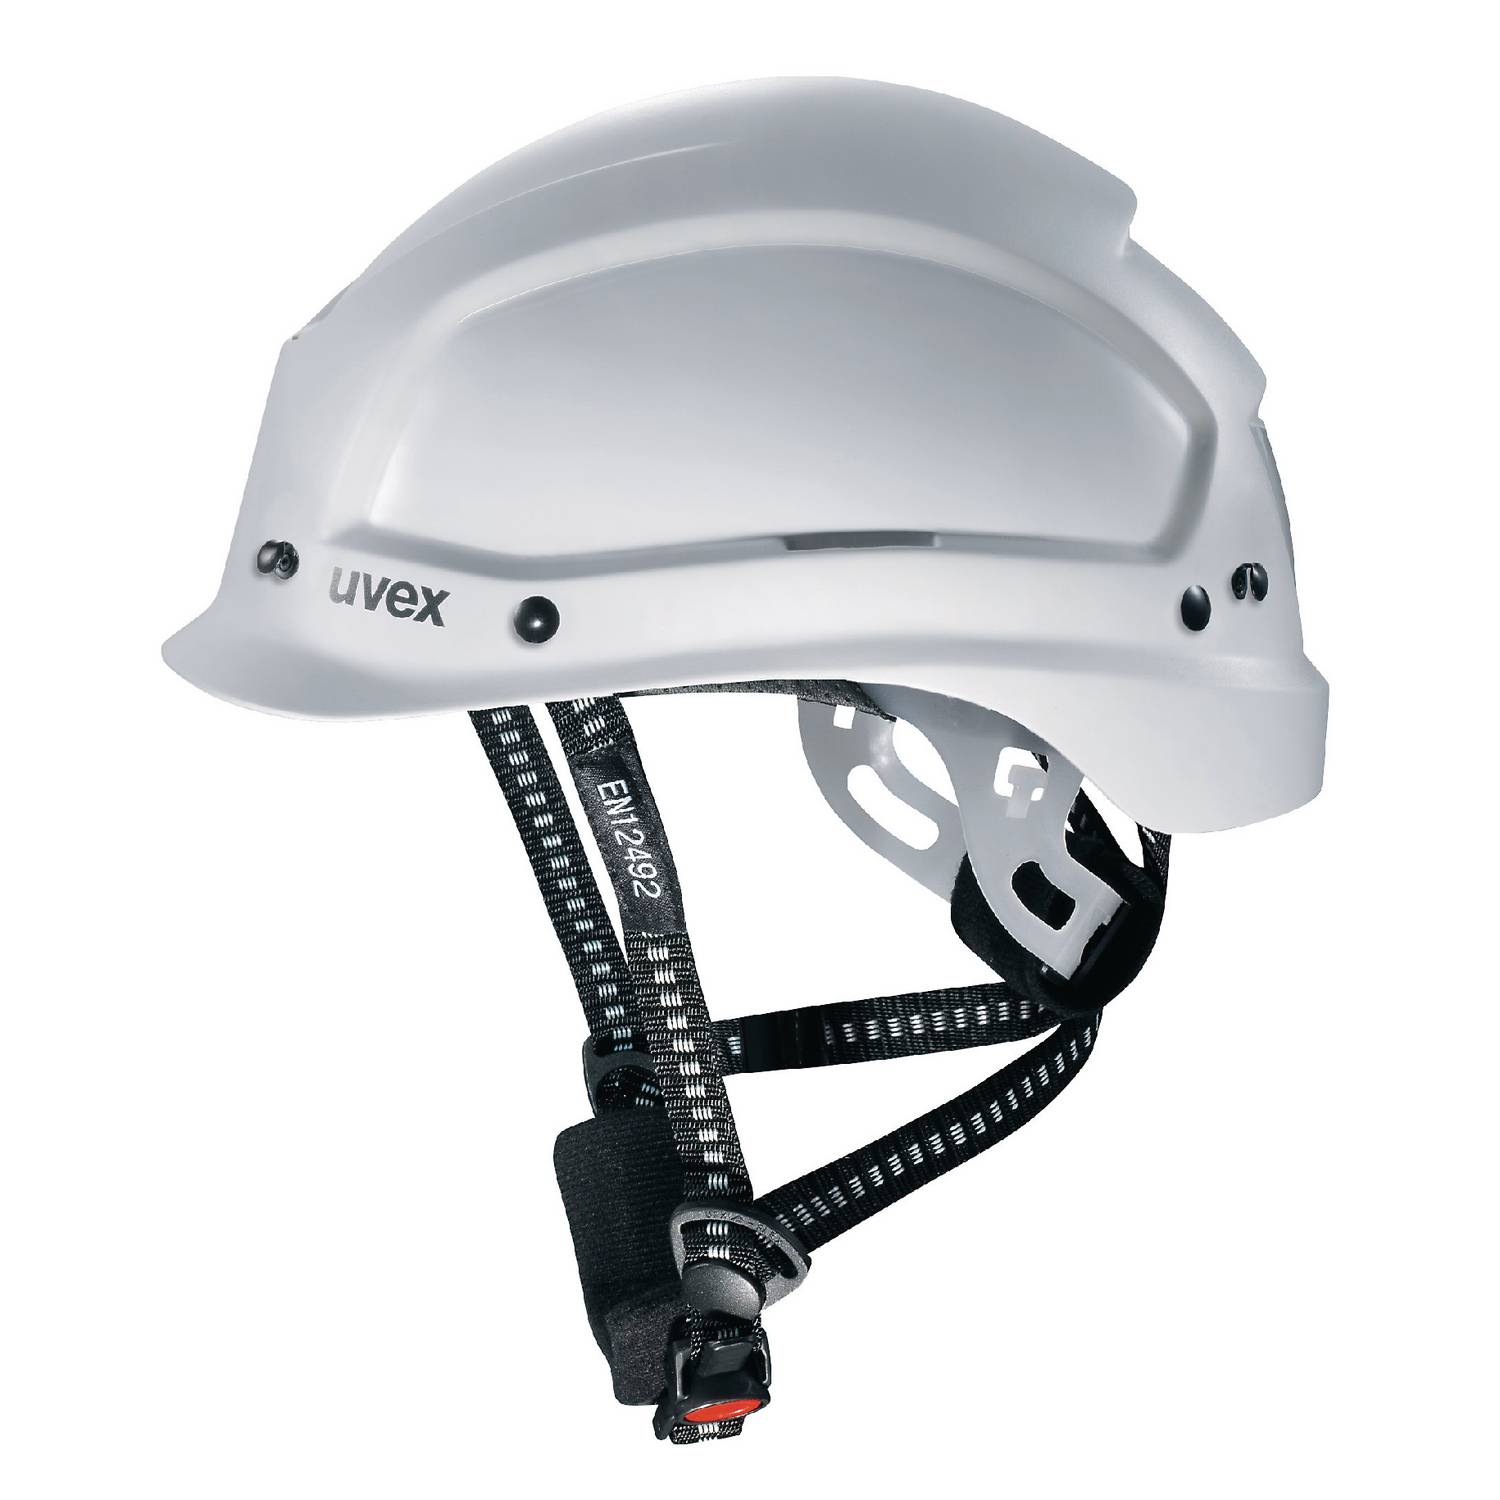 Uvex Pheos Hard Hat Safety Helmet White ABS Ventilated 9773050 Mountaineering 